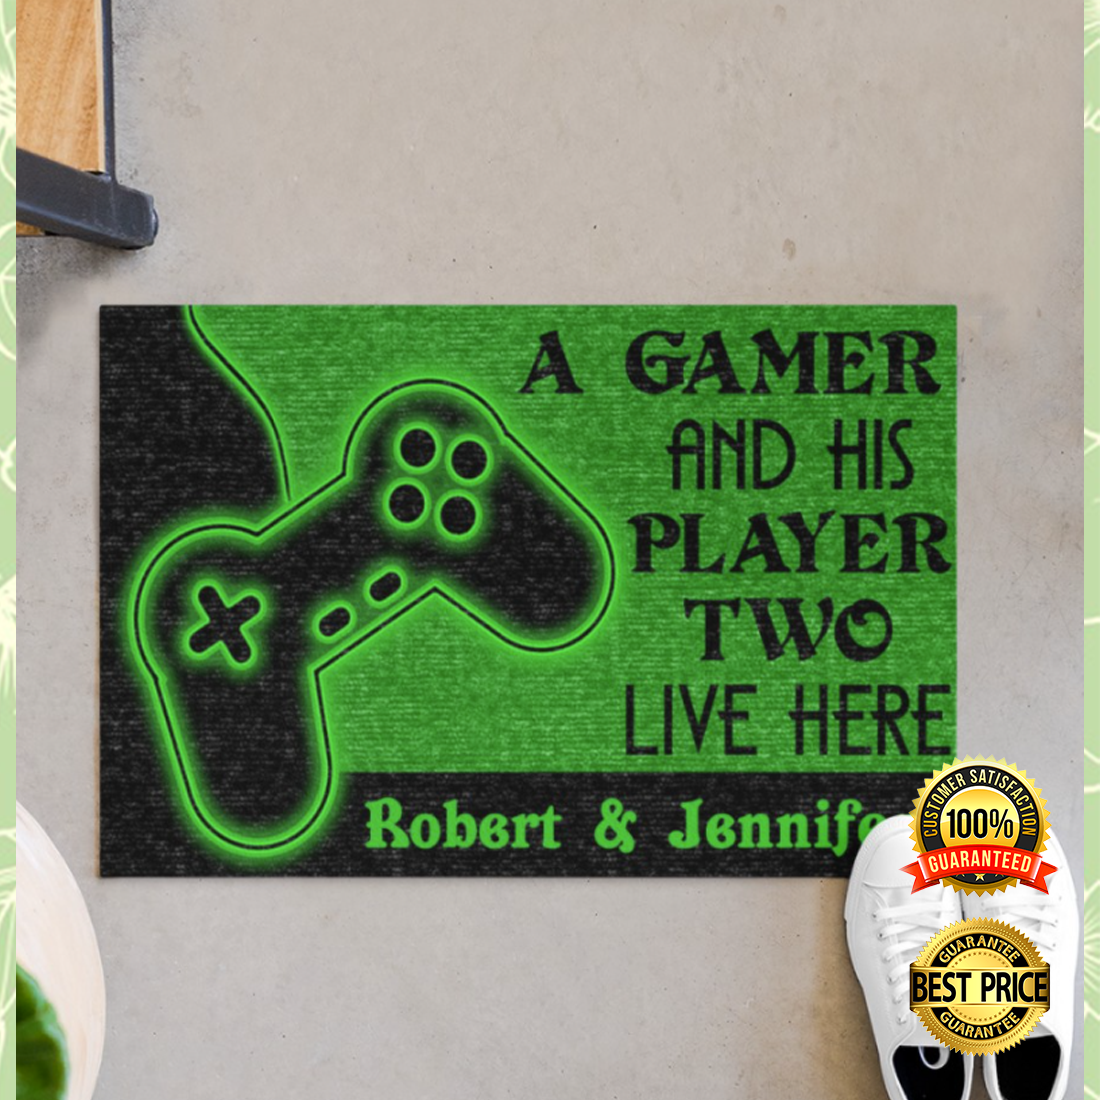 PERRSONALIZED A GAMER AND HIS PLAYER TWO LIVE HERE DOORMAT 4